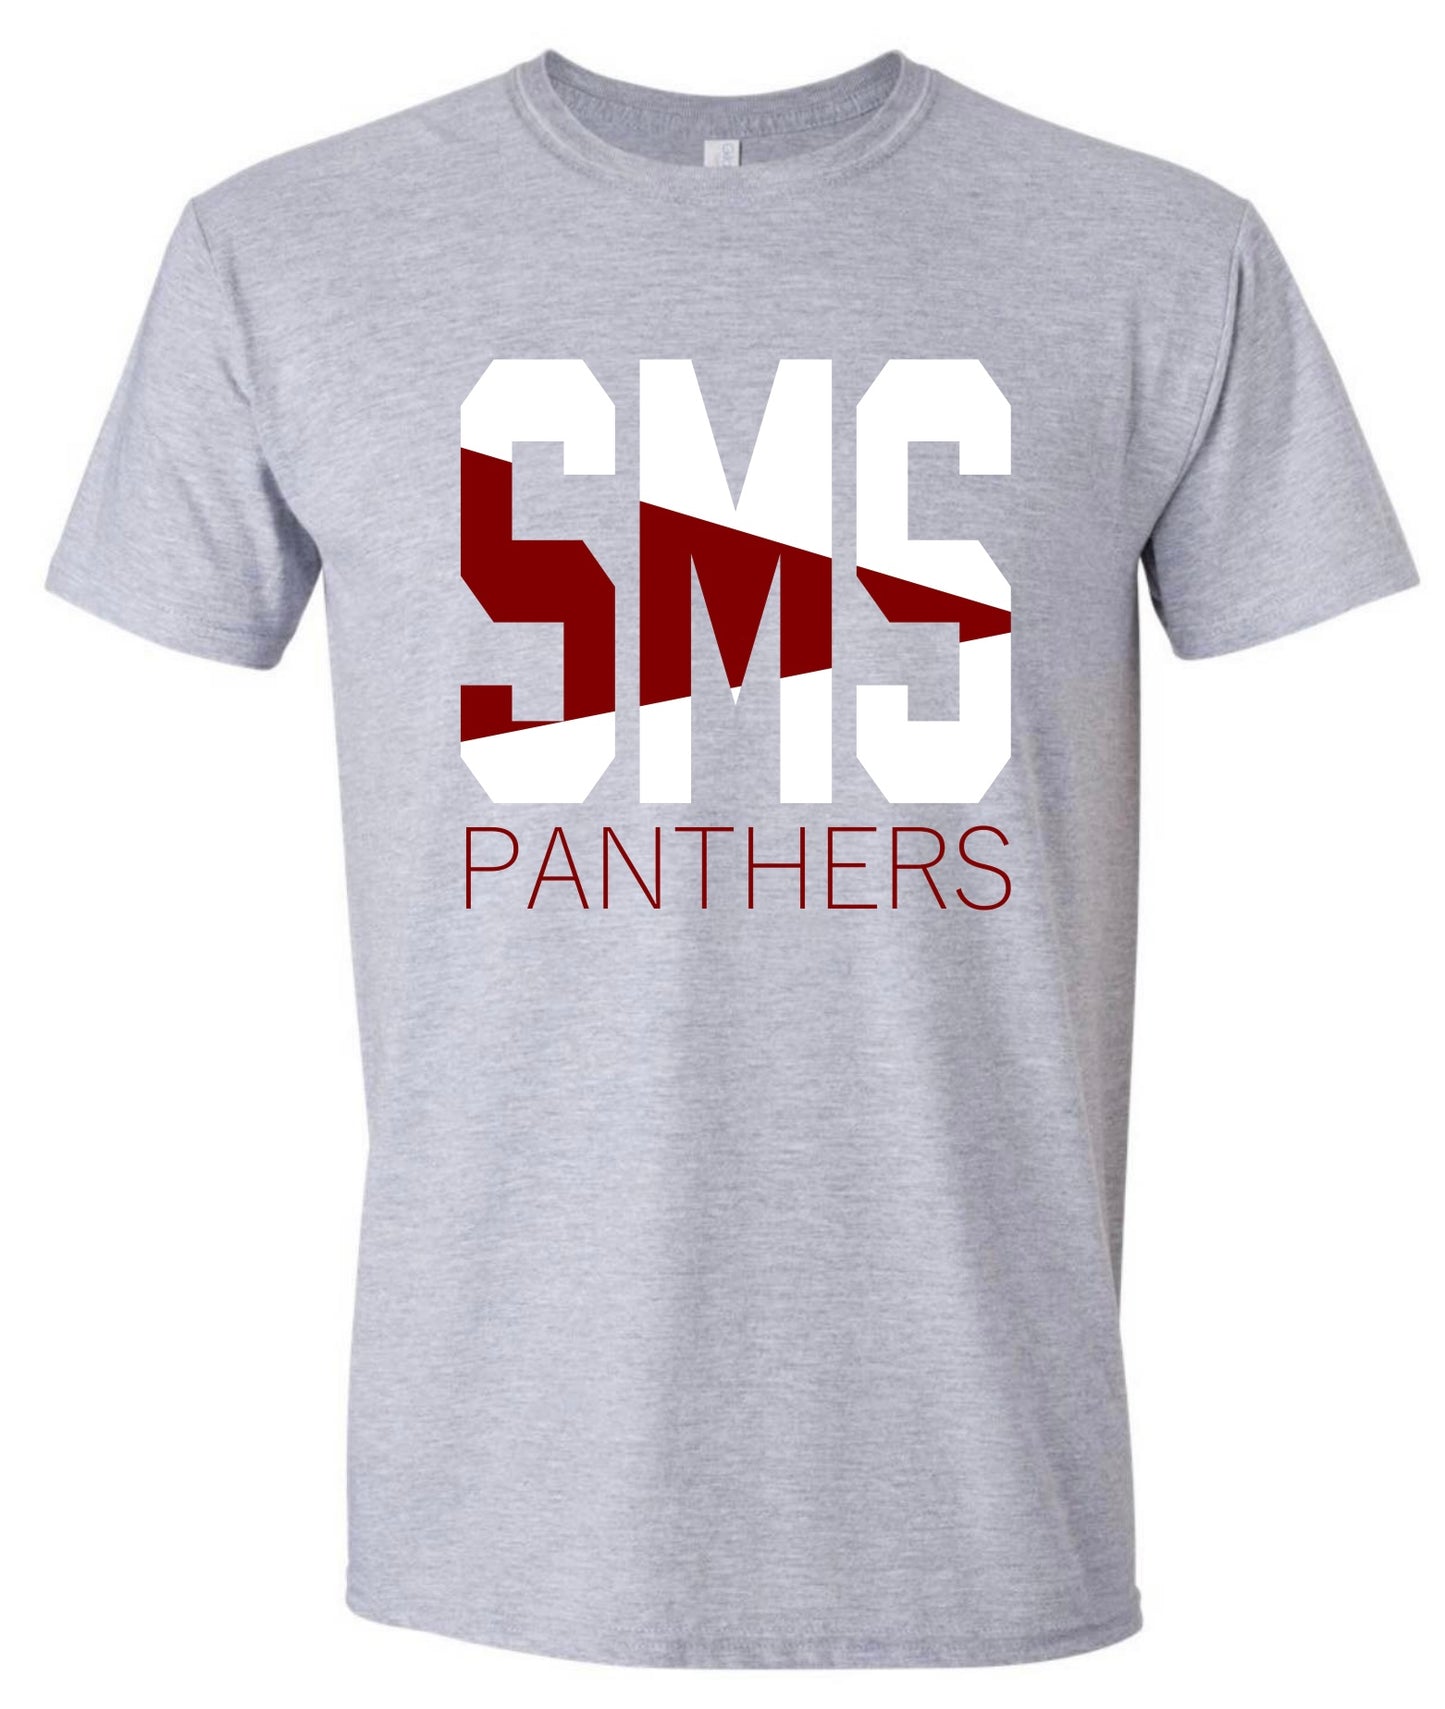 SMS Panthers Two Tone Tshirt